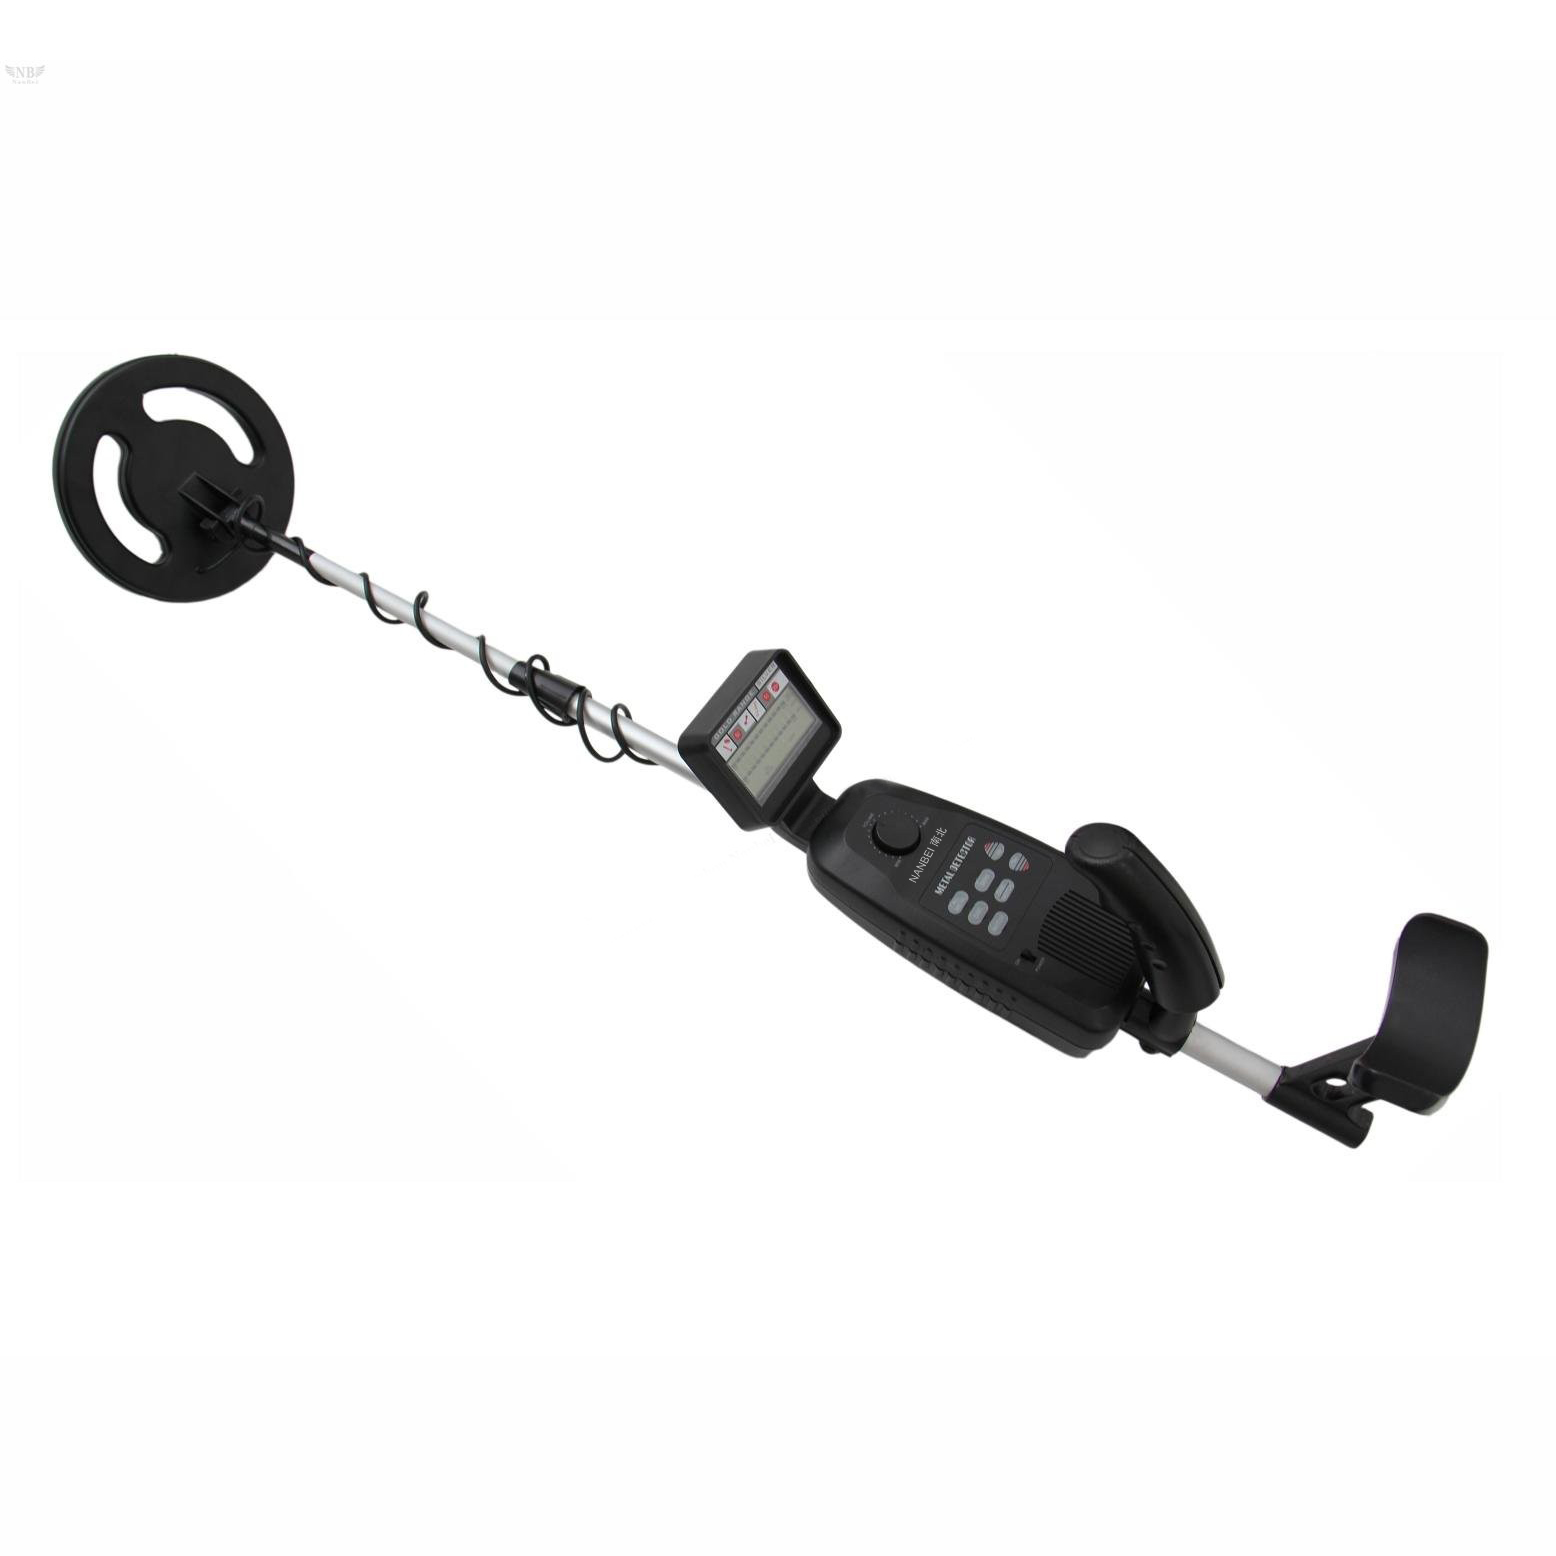 MD-3500 LCD Display Ground Search Metal Detectors